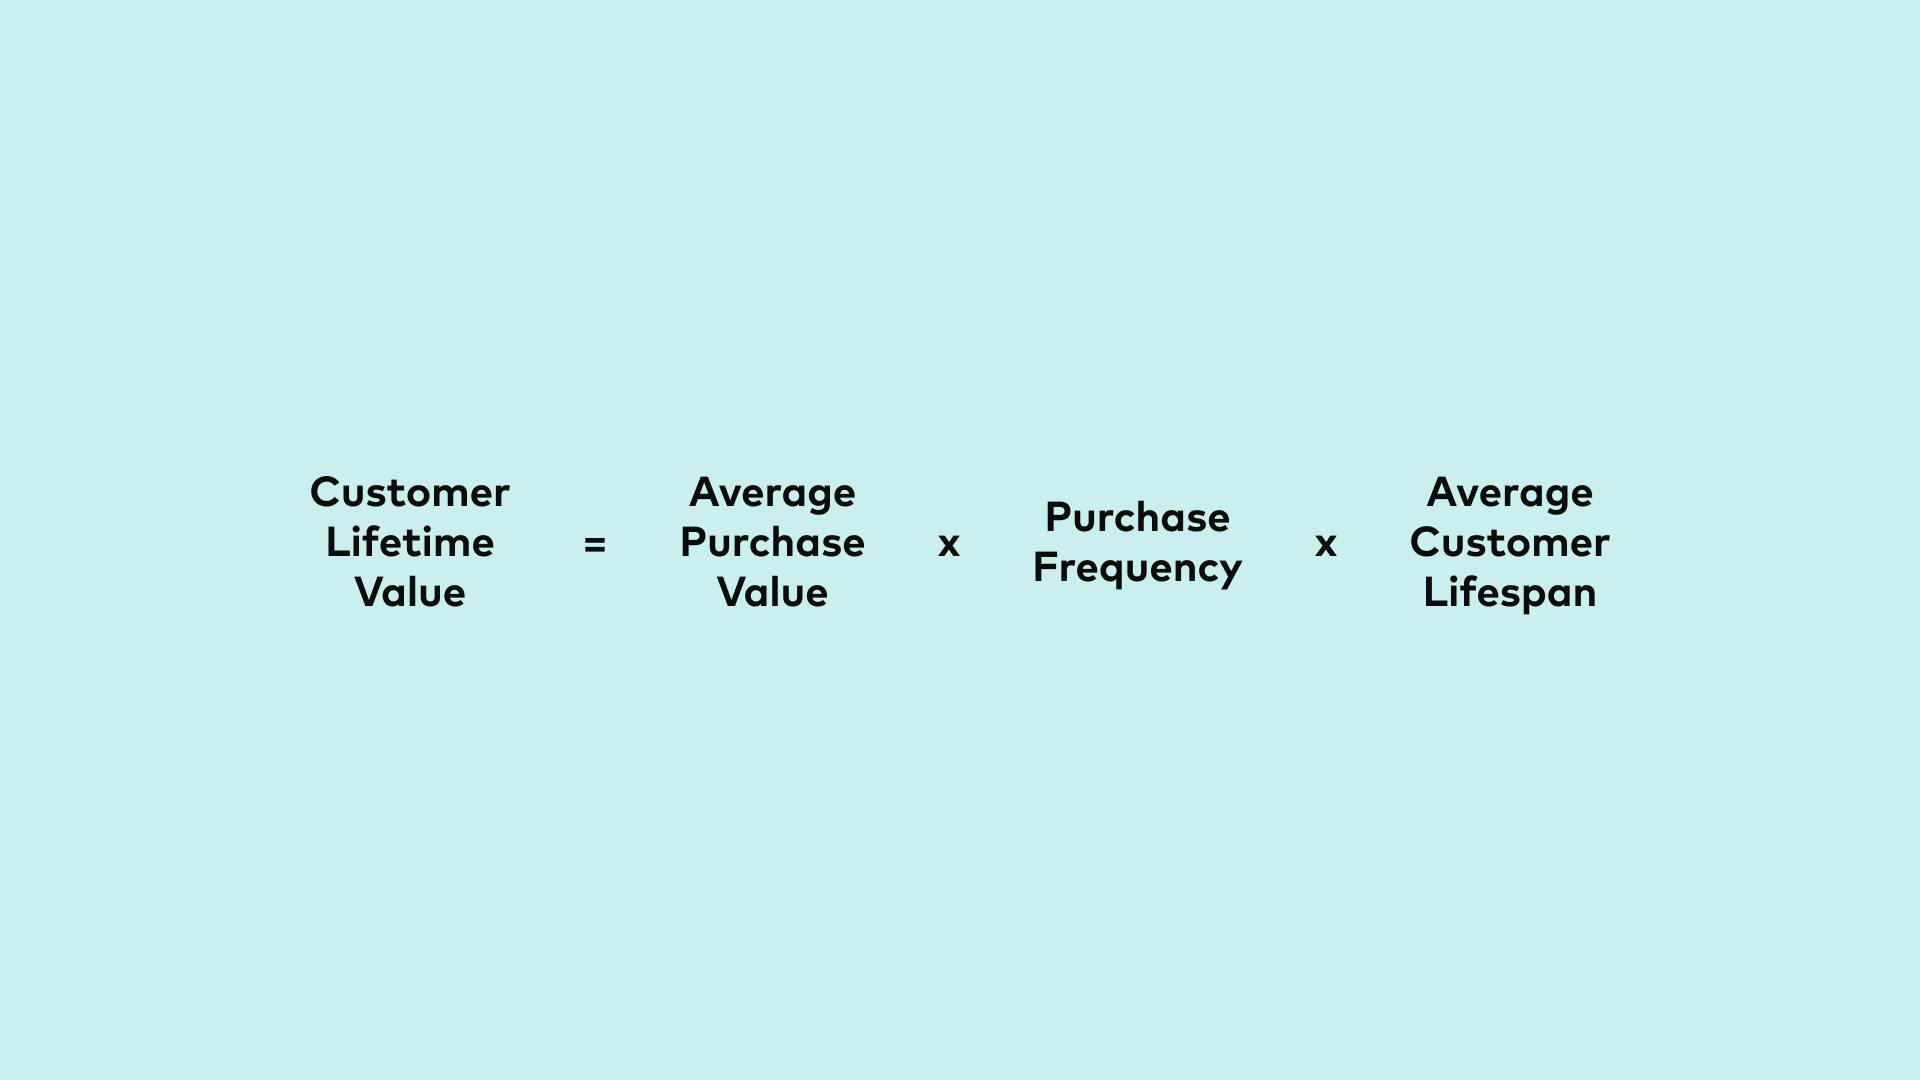 Calculation for Customer Lifetime Value